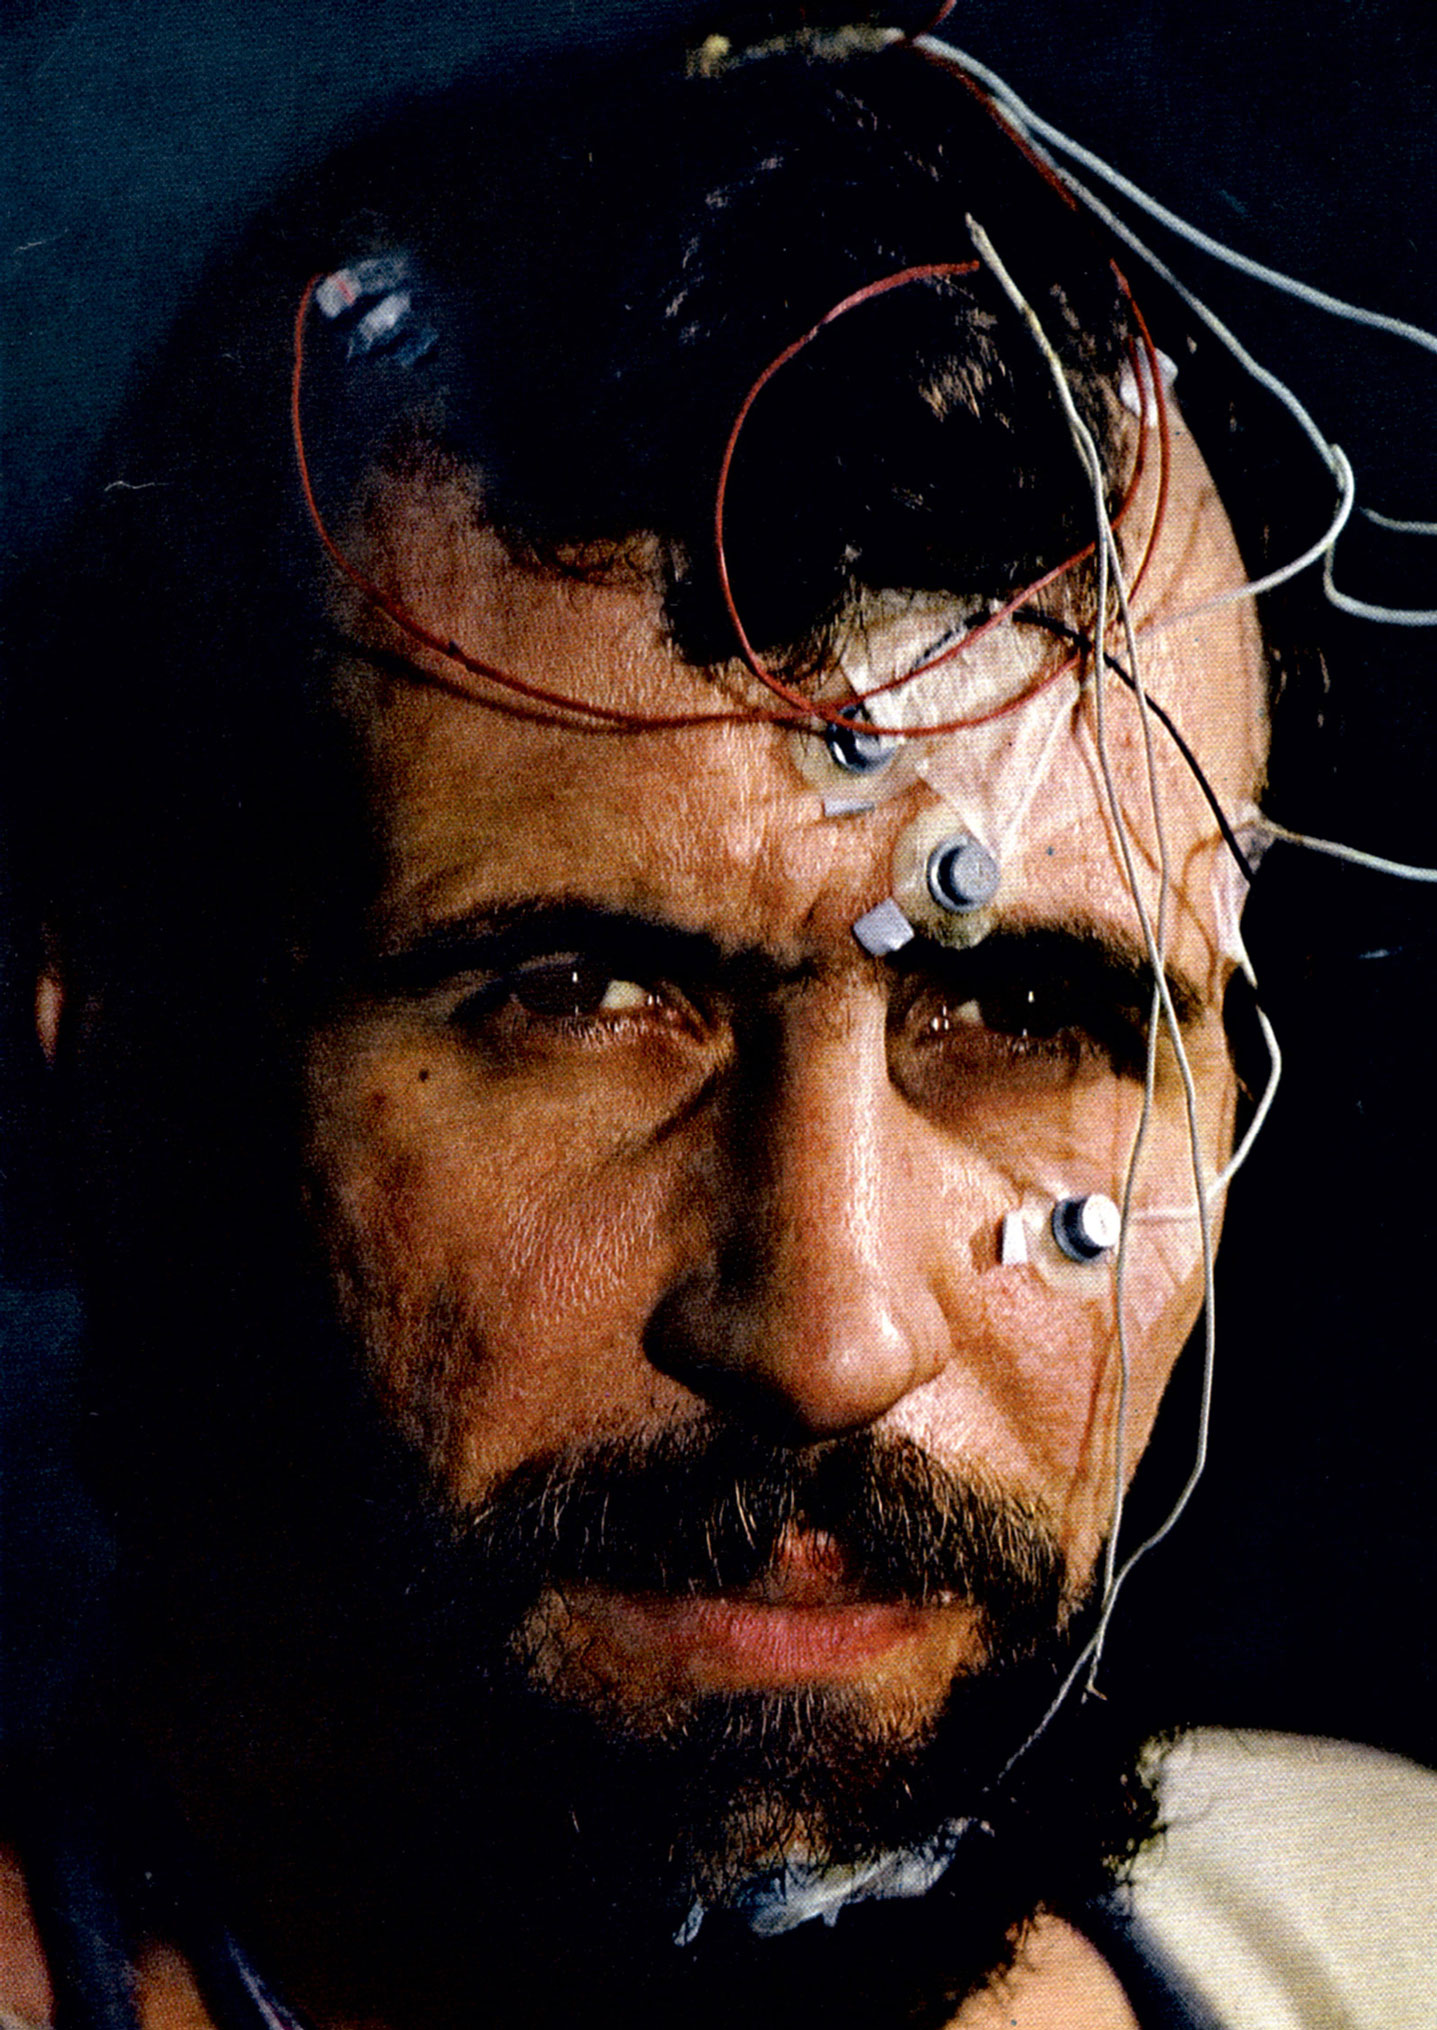 Siffre adorned with the electrodes that monitored his heart, brain, and muscle activity during his 1972 experiment.